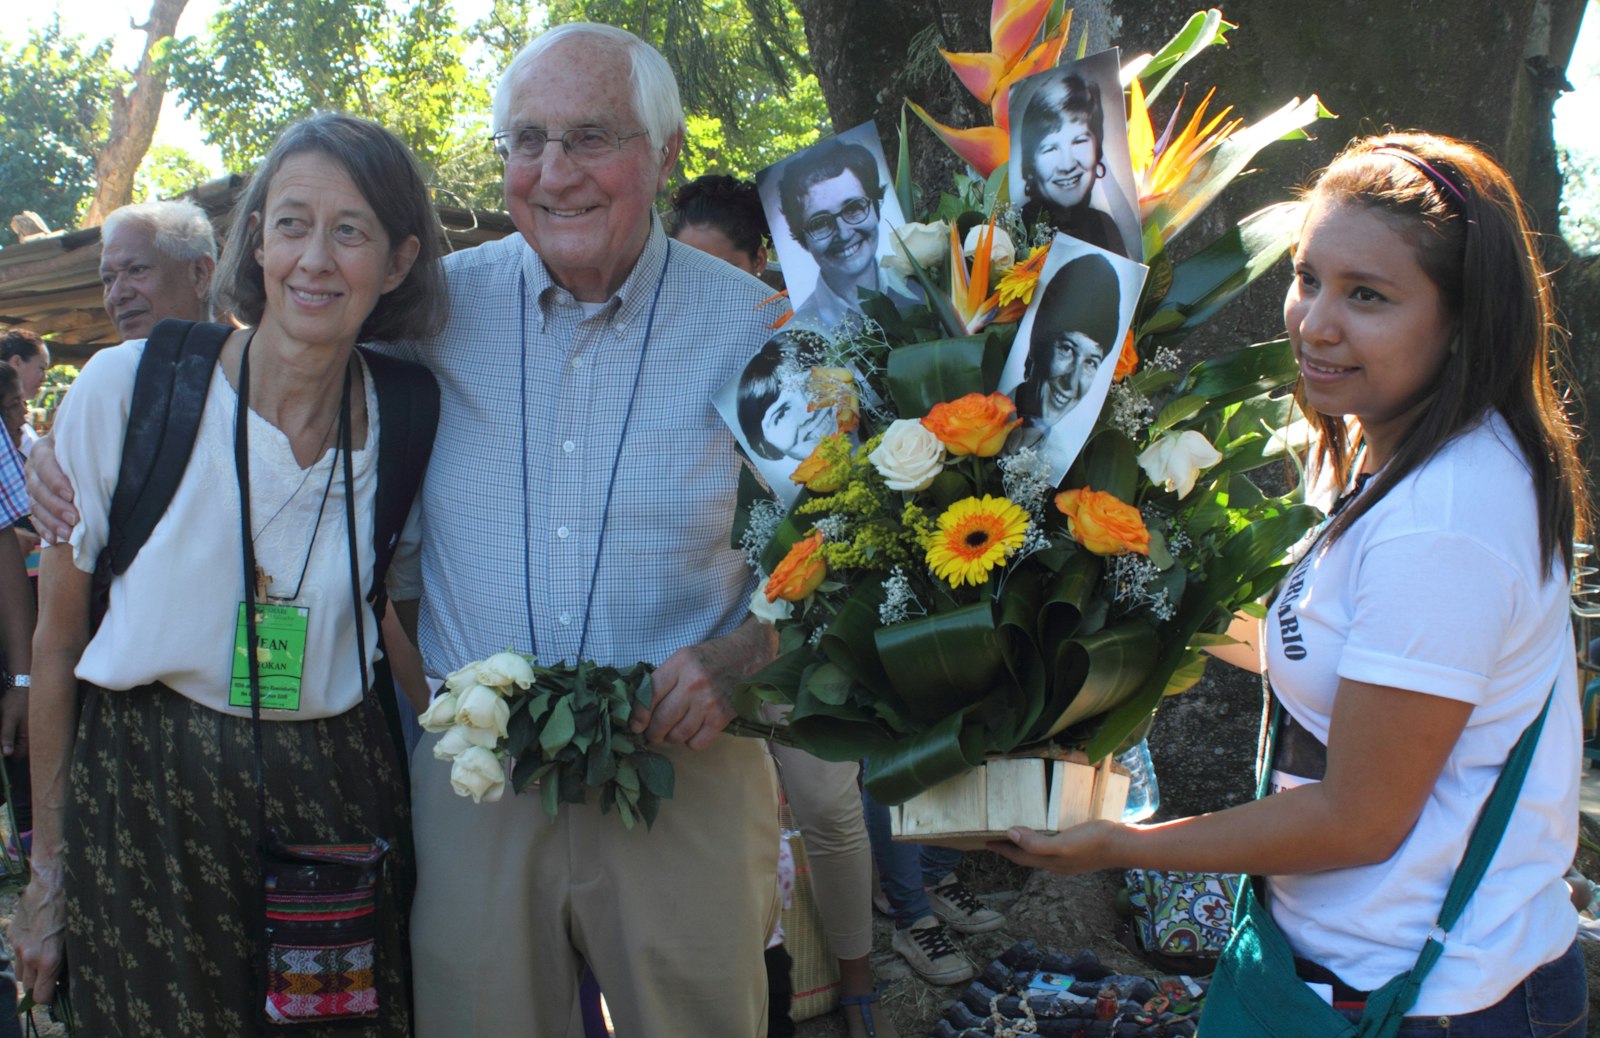 Jean Stokan, director of the Justice Team for the Sisters of Mercy, and retired Auxiliary Bishop Thomas J. Gumbleton of Detroit pose for a photo during a Dec. 2, 2015, memorial service to commemorate the 35th anniversary of the murder of four U.S. churchwomen in Santiago Nonualco, El Salvador. (CNS photo/Edgardo Ayala)